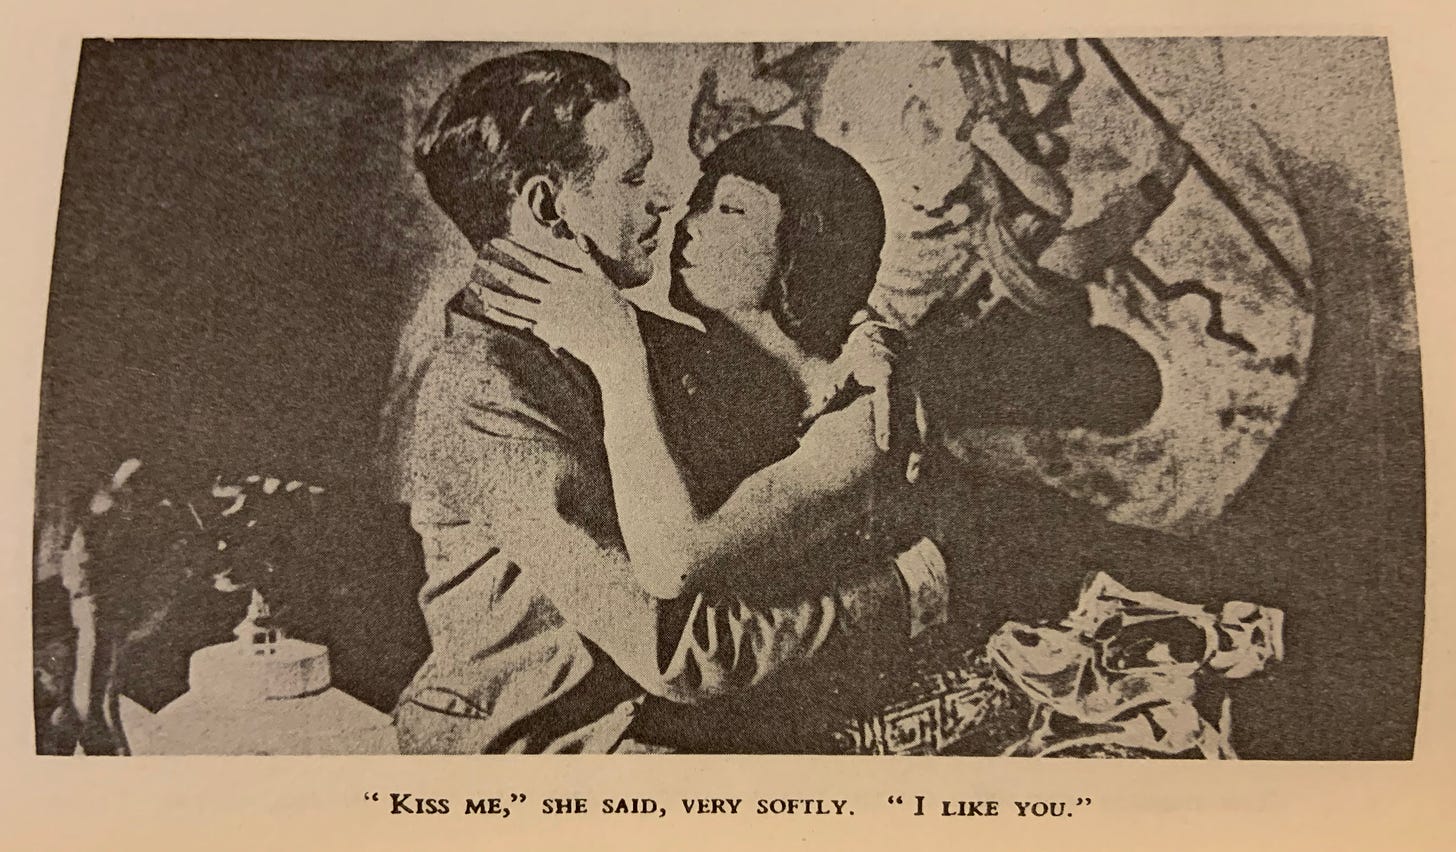 Anna May Wong embraces her co-star, Jameson Thomas, in Piccadilly, circa 1929. Their kiss was filmed but later cut from the final reel.